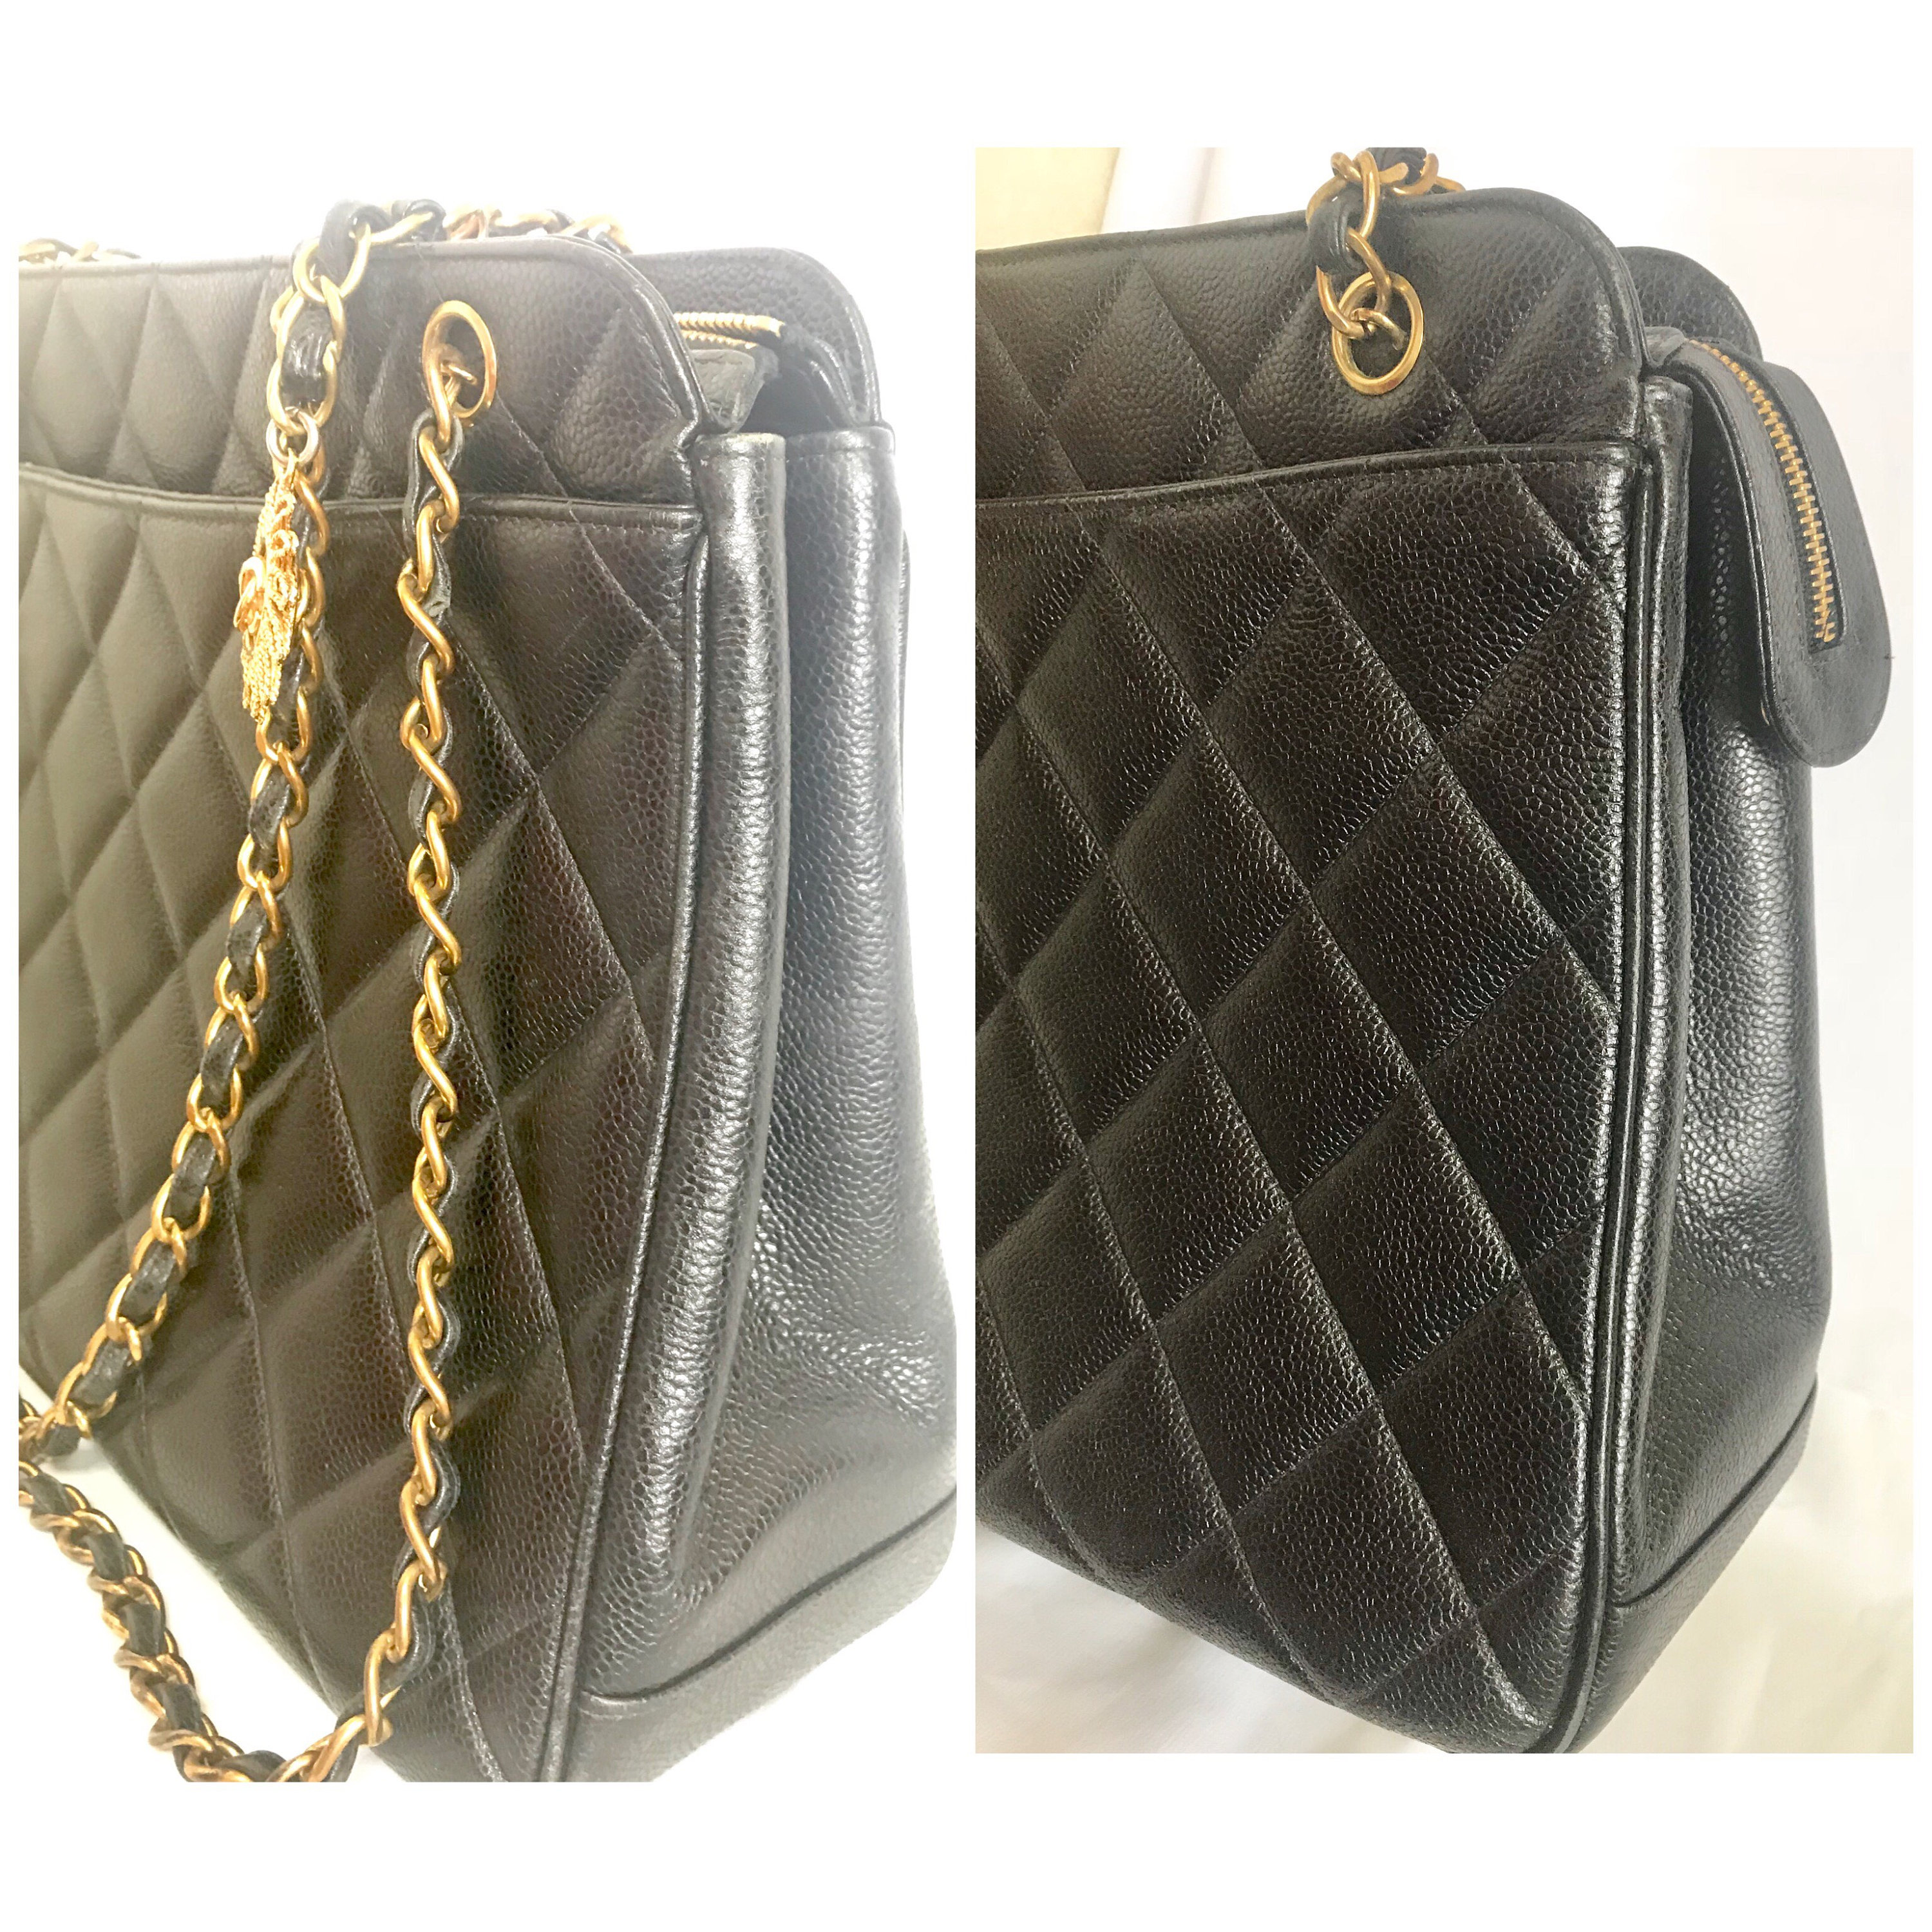 Buy Free Shipping [Used] CHANEL Mini Matelasse 20 Chain Shoulder Bag Caviar  Skin Light Green from Japan - Buy authentic Plus exclusive items from Japan